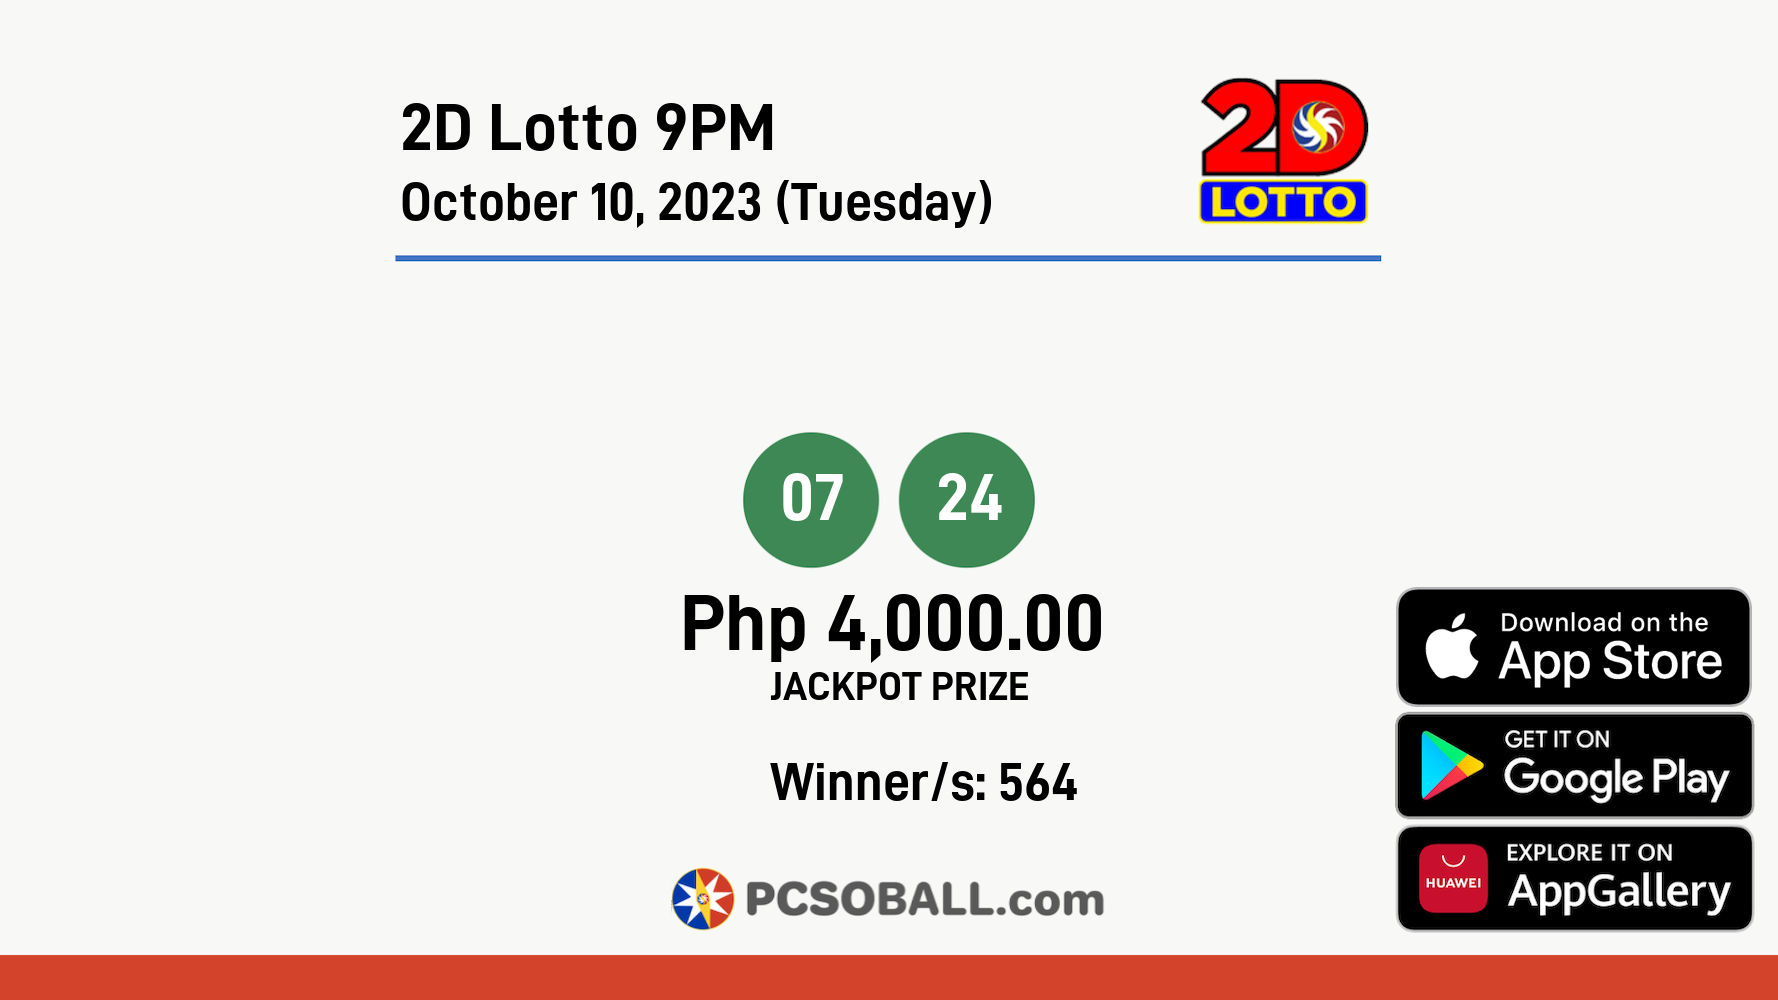 2D Lotto 9PM October 10, 2023 (Tuesday) Result